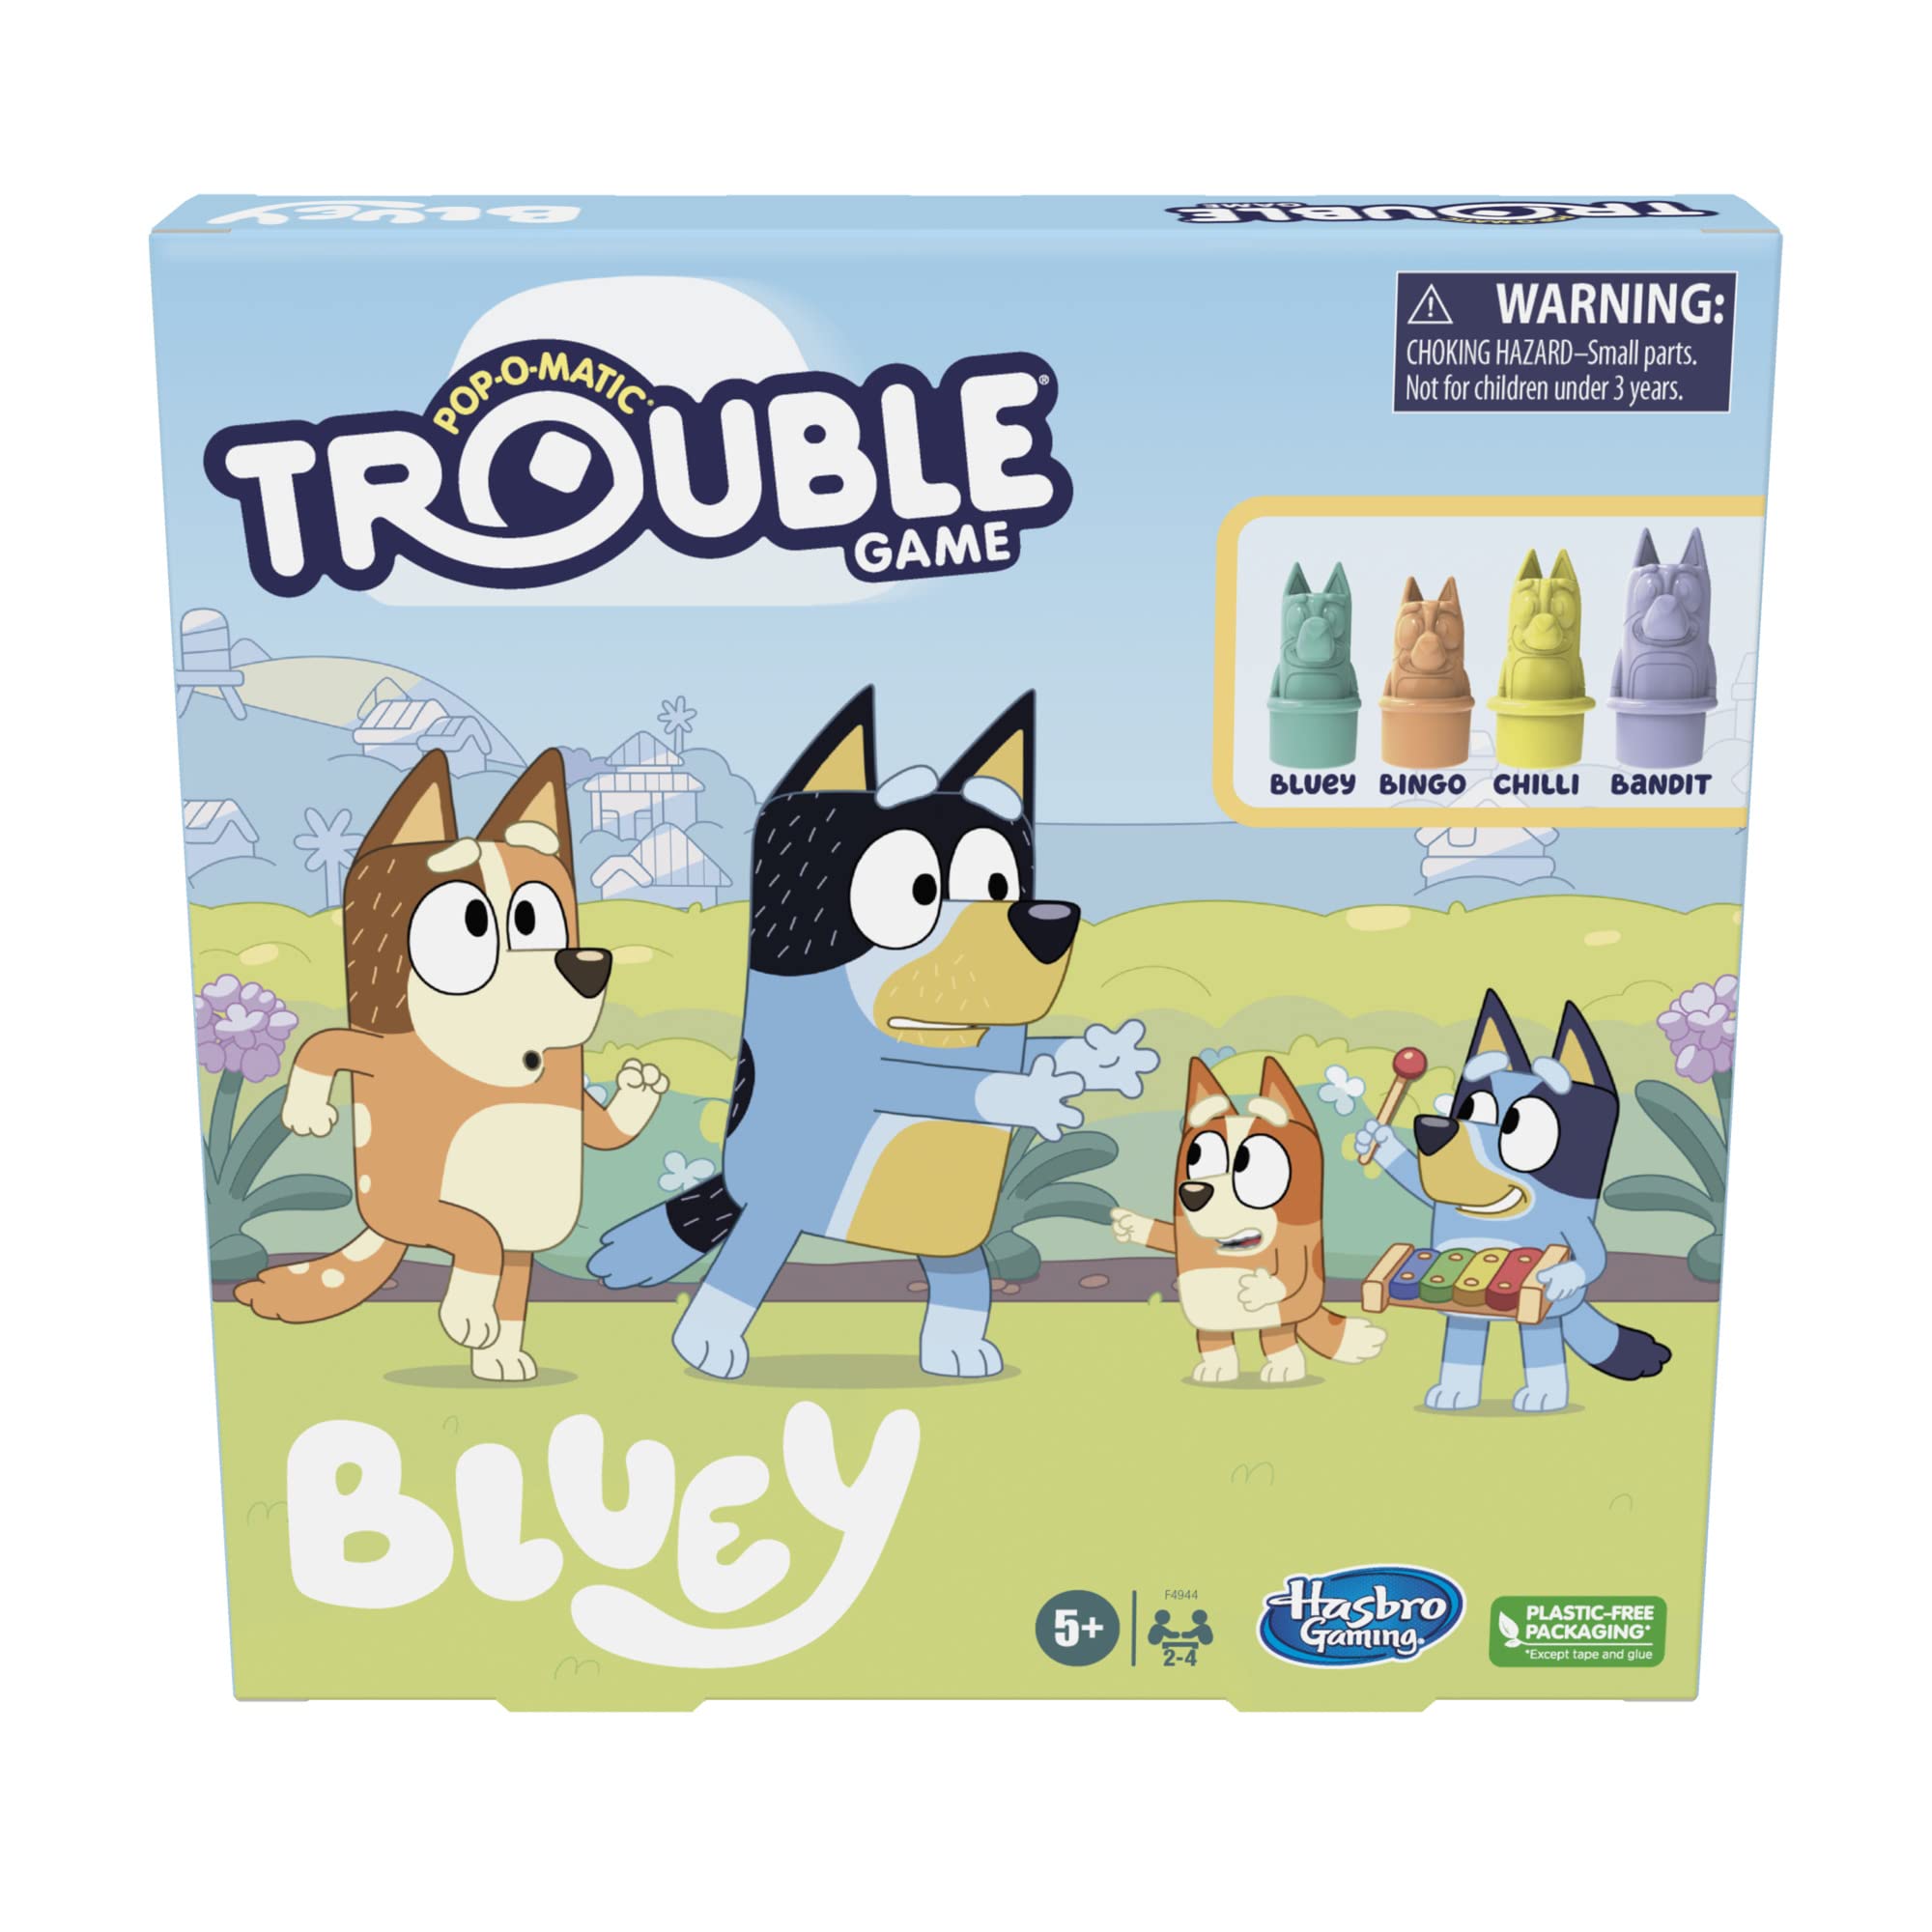 Hasbro Trouble: Bluey Edition Board game, Fun game for Kids Ages 5 and Up, game for 2-4 Players, Race Bluey, Bingo, Bandit, or chilli t